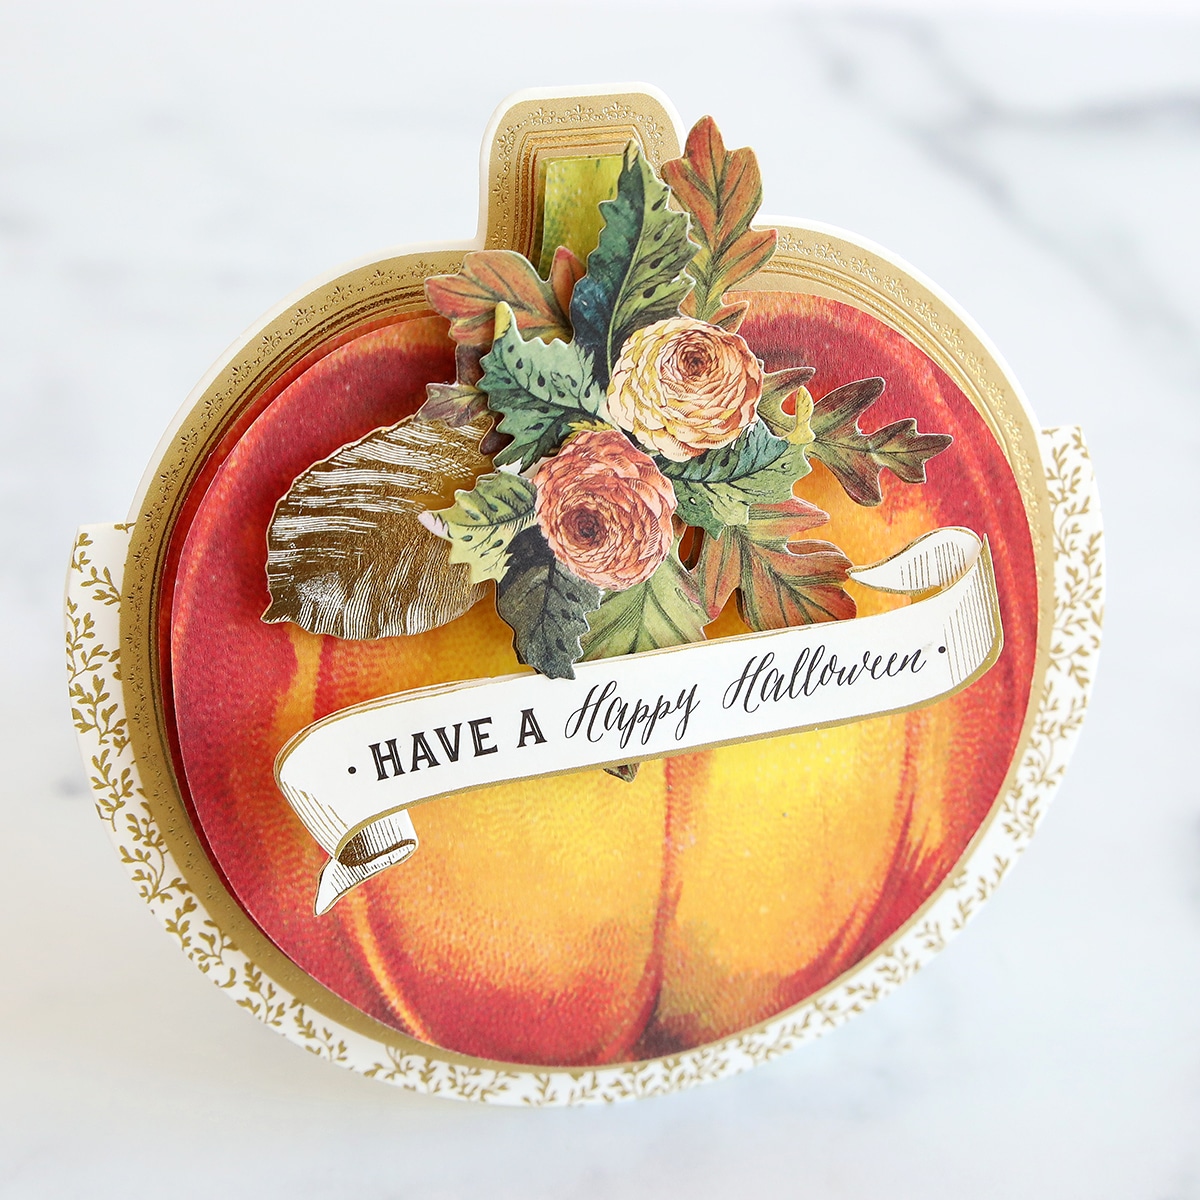 A card with a pumpkin and flowers on it.